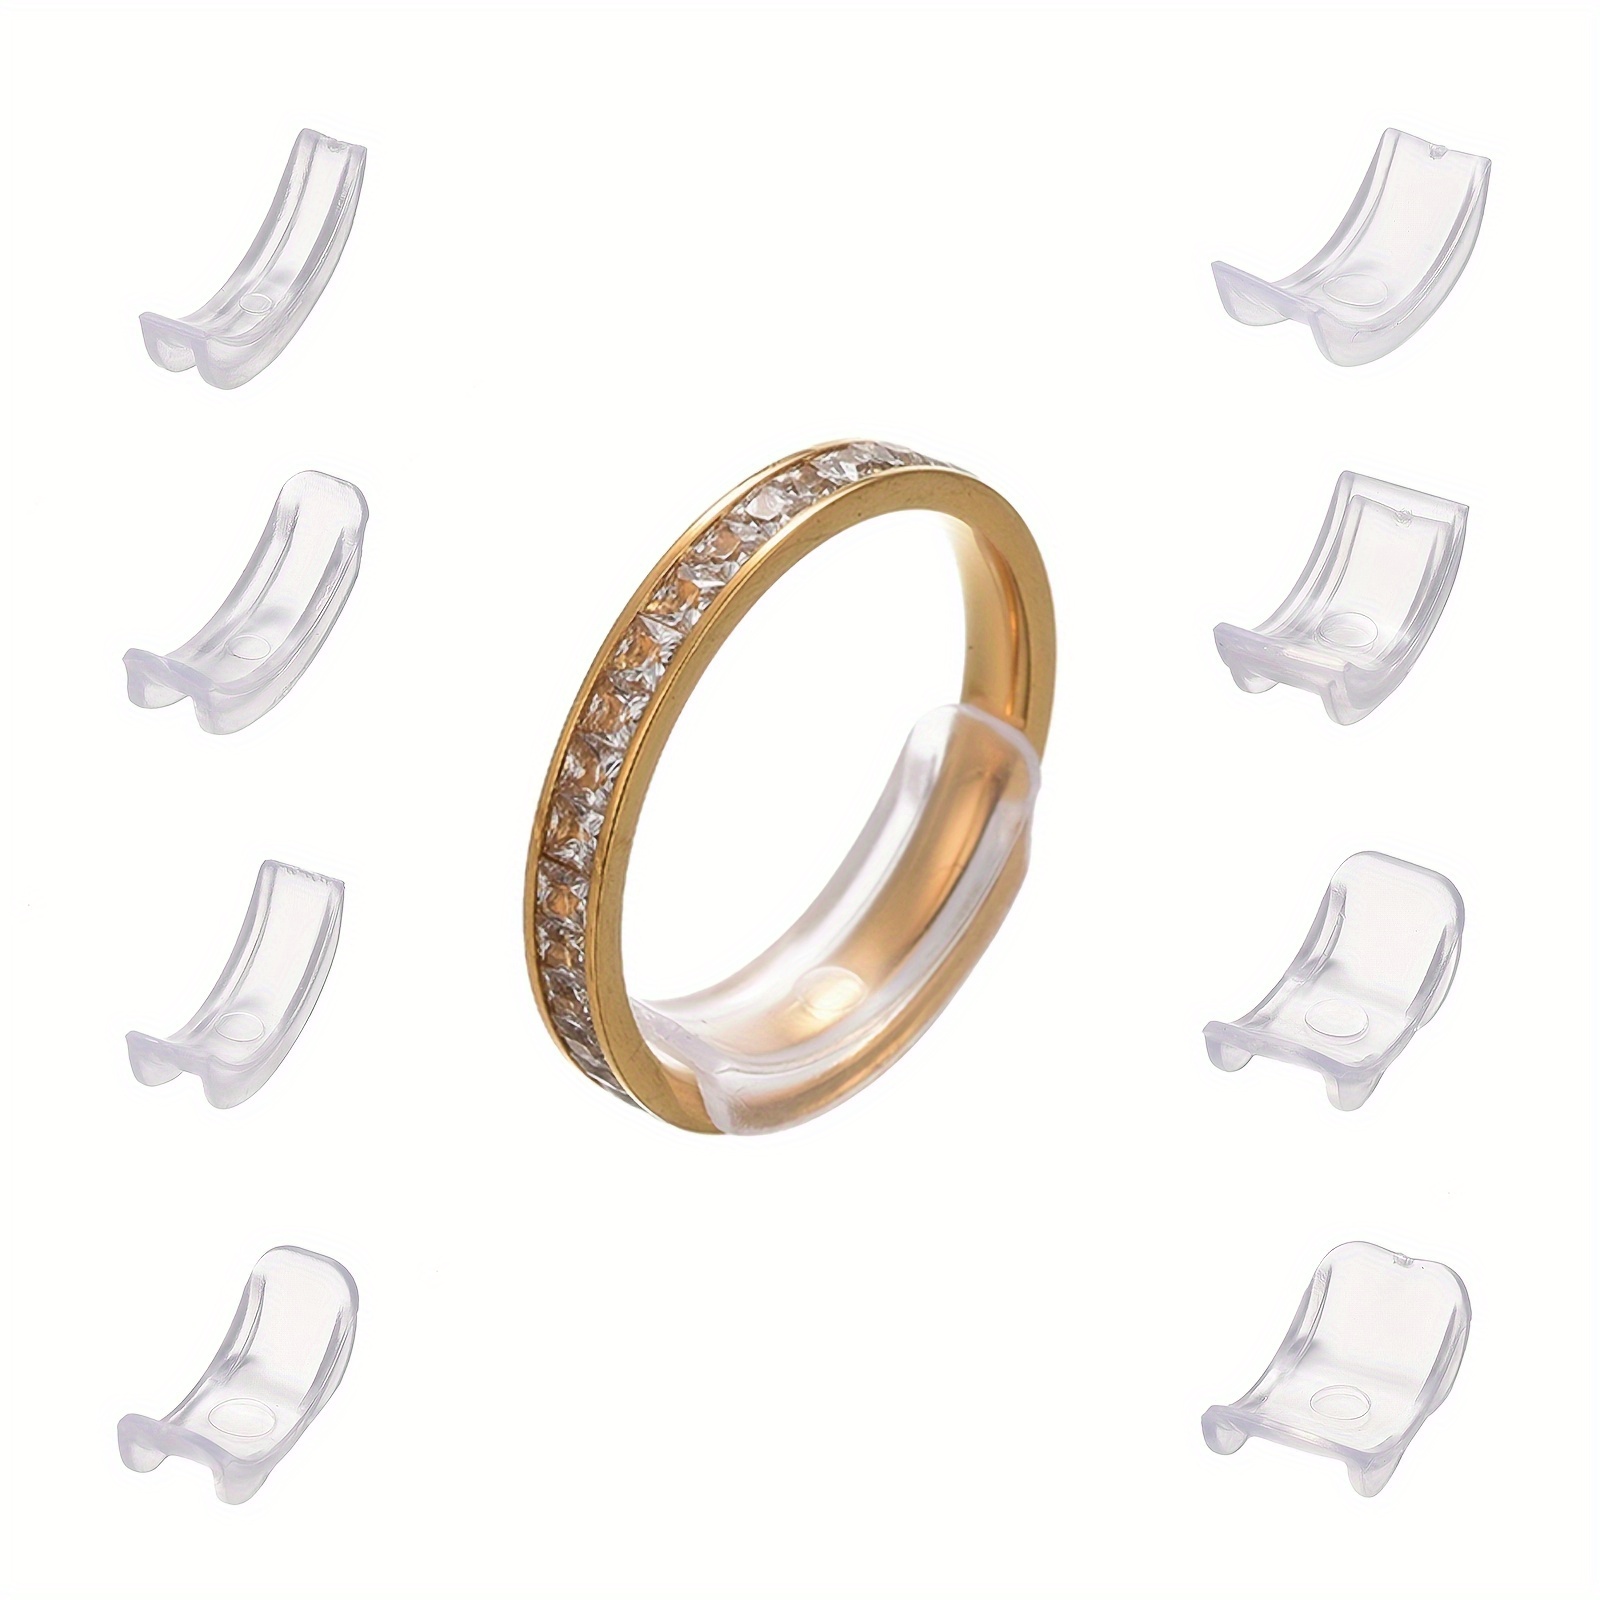 New 12pcs Ring Size Reducer Invisible Ring Size Adjuster For Loose Rings  Ring Adjuster Size Fit Any Rings Ring Guard Spacer Rings Resizer Wedding  Accessories